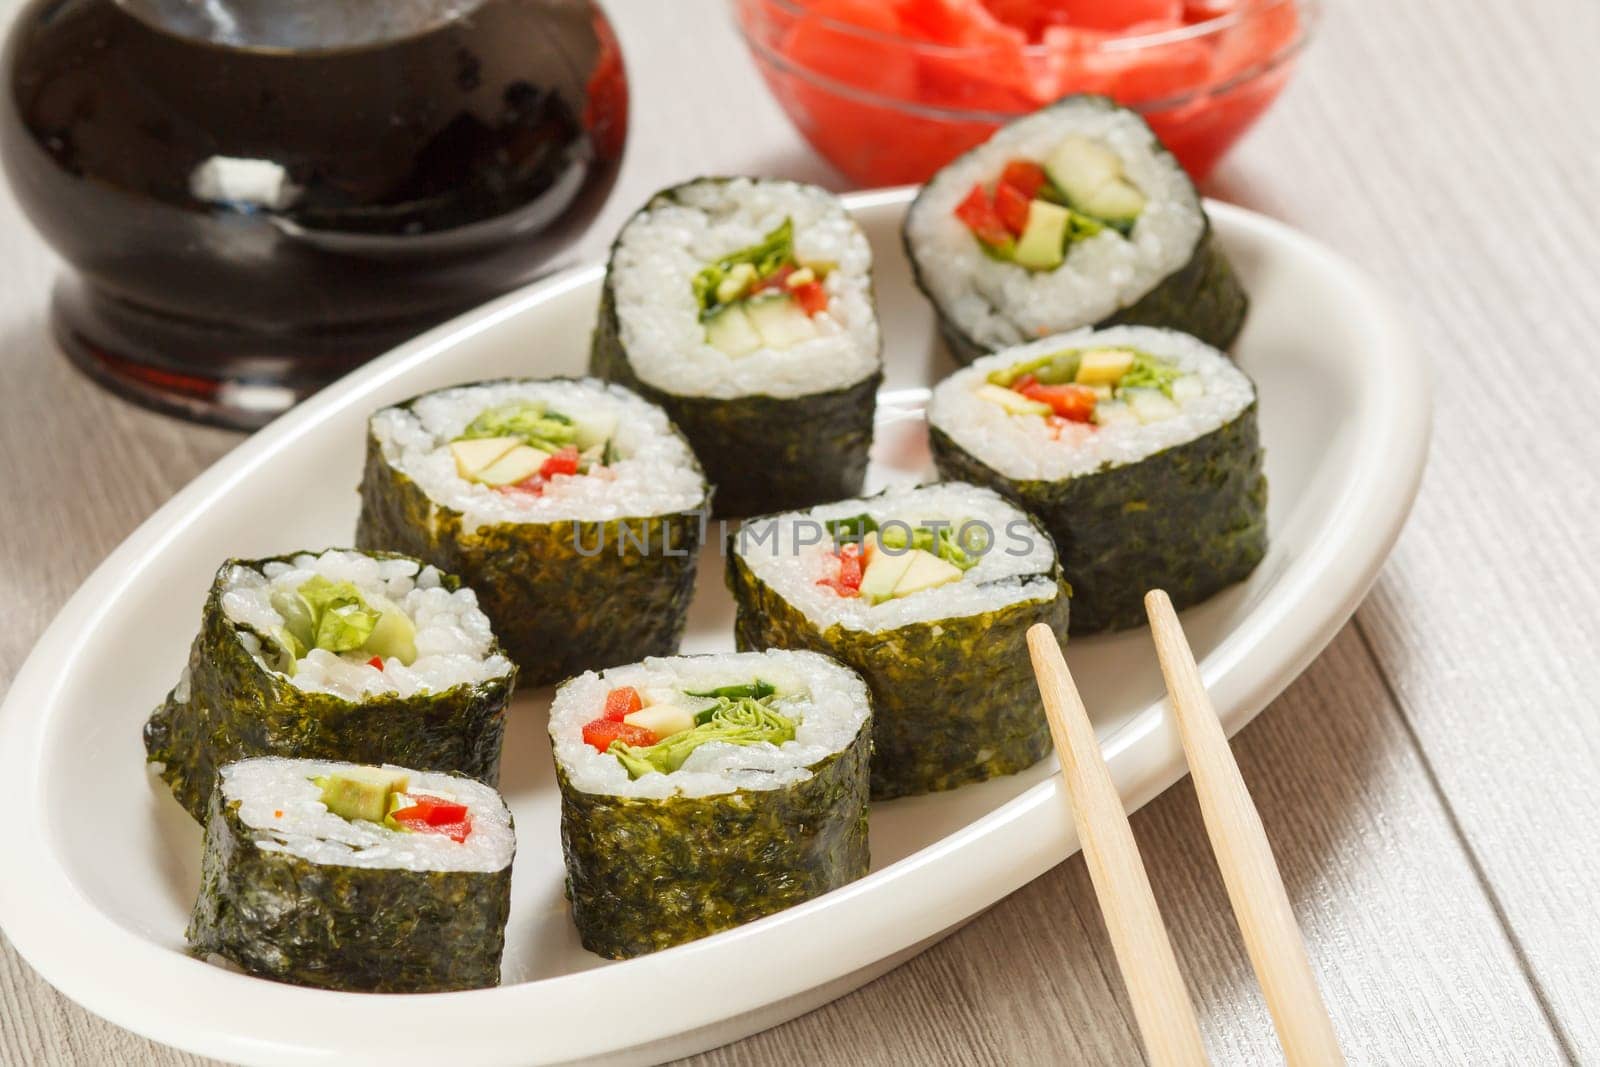 Sushi rolls with rice, pieces of avocado, cucumber, red bell pepper and lettuce leaves on ceramic plate, chopsticks, glass bottle with soy sauce and pickled ginger in a bowl. Vegetarian food.